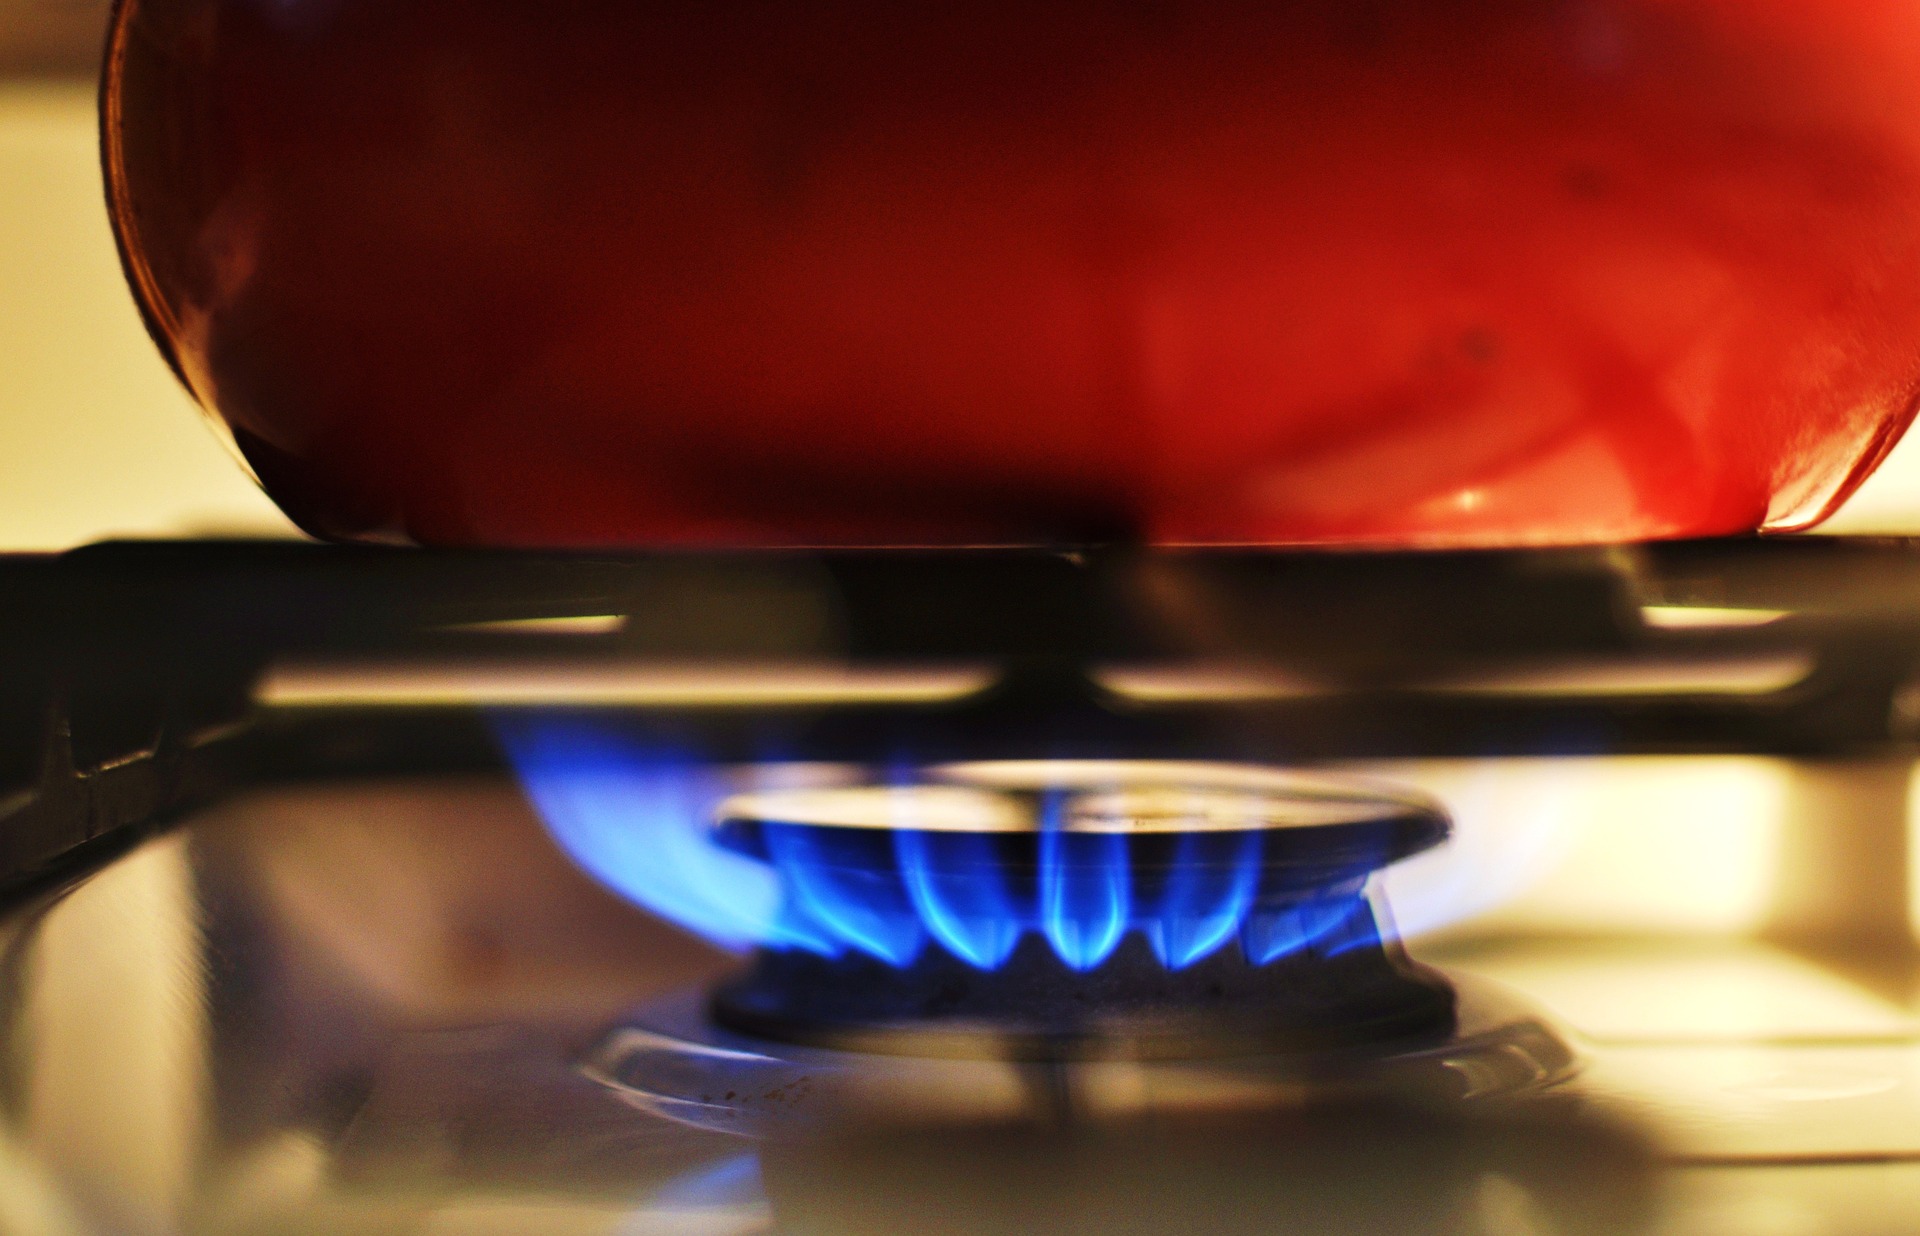 A red kettle sits on a burner with flames.